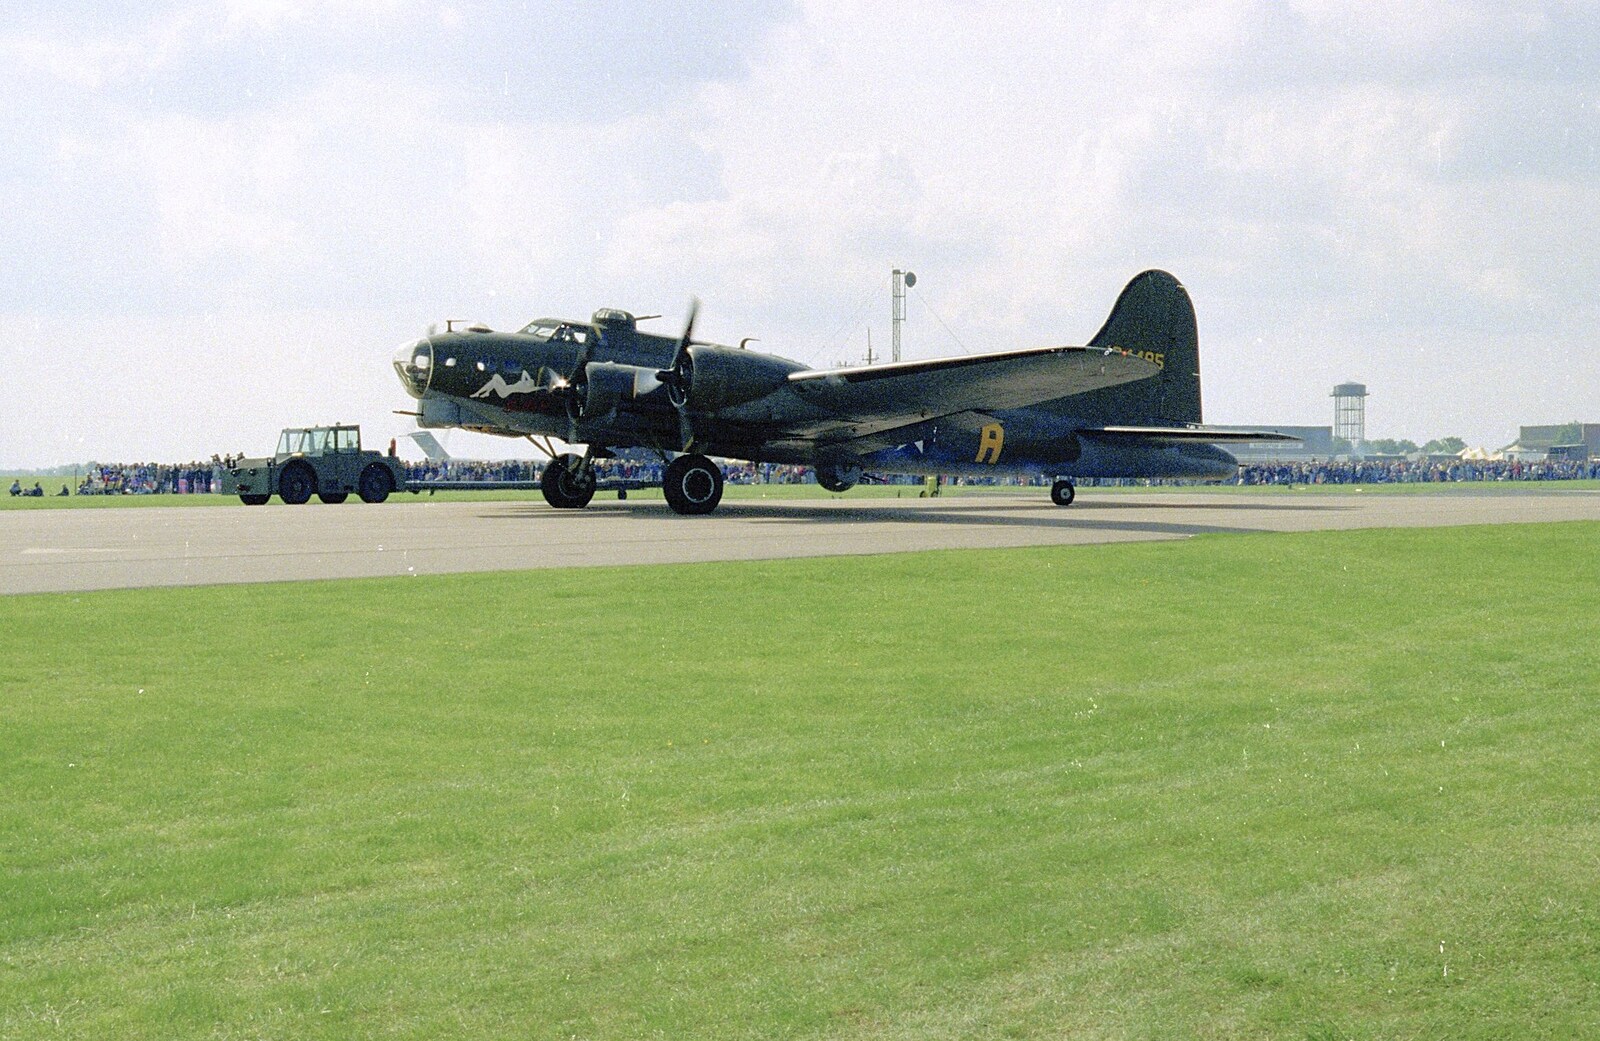 Sally B from The Mildenhall Air Fete, Mildenhall, Suffolk - 29th May 1994